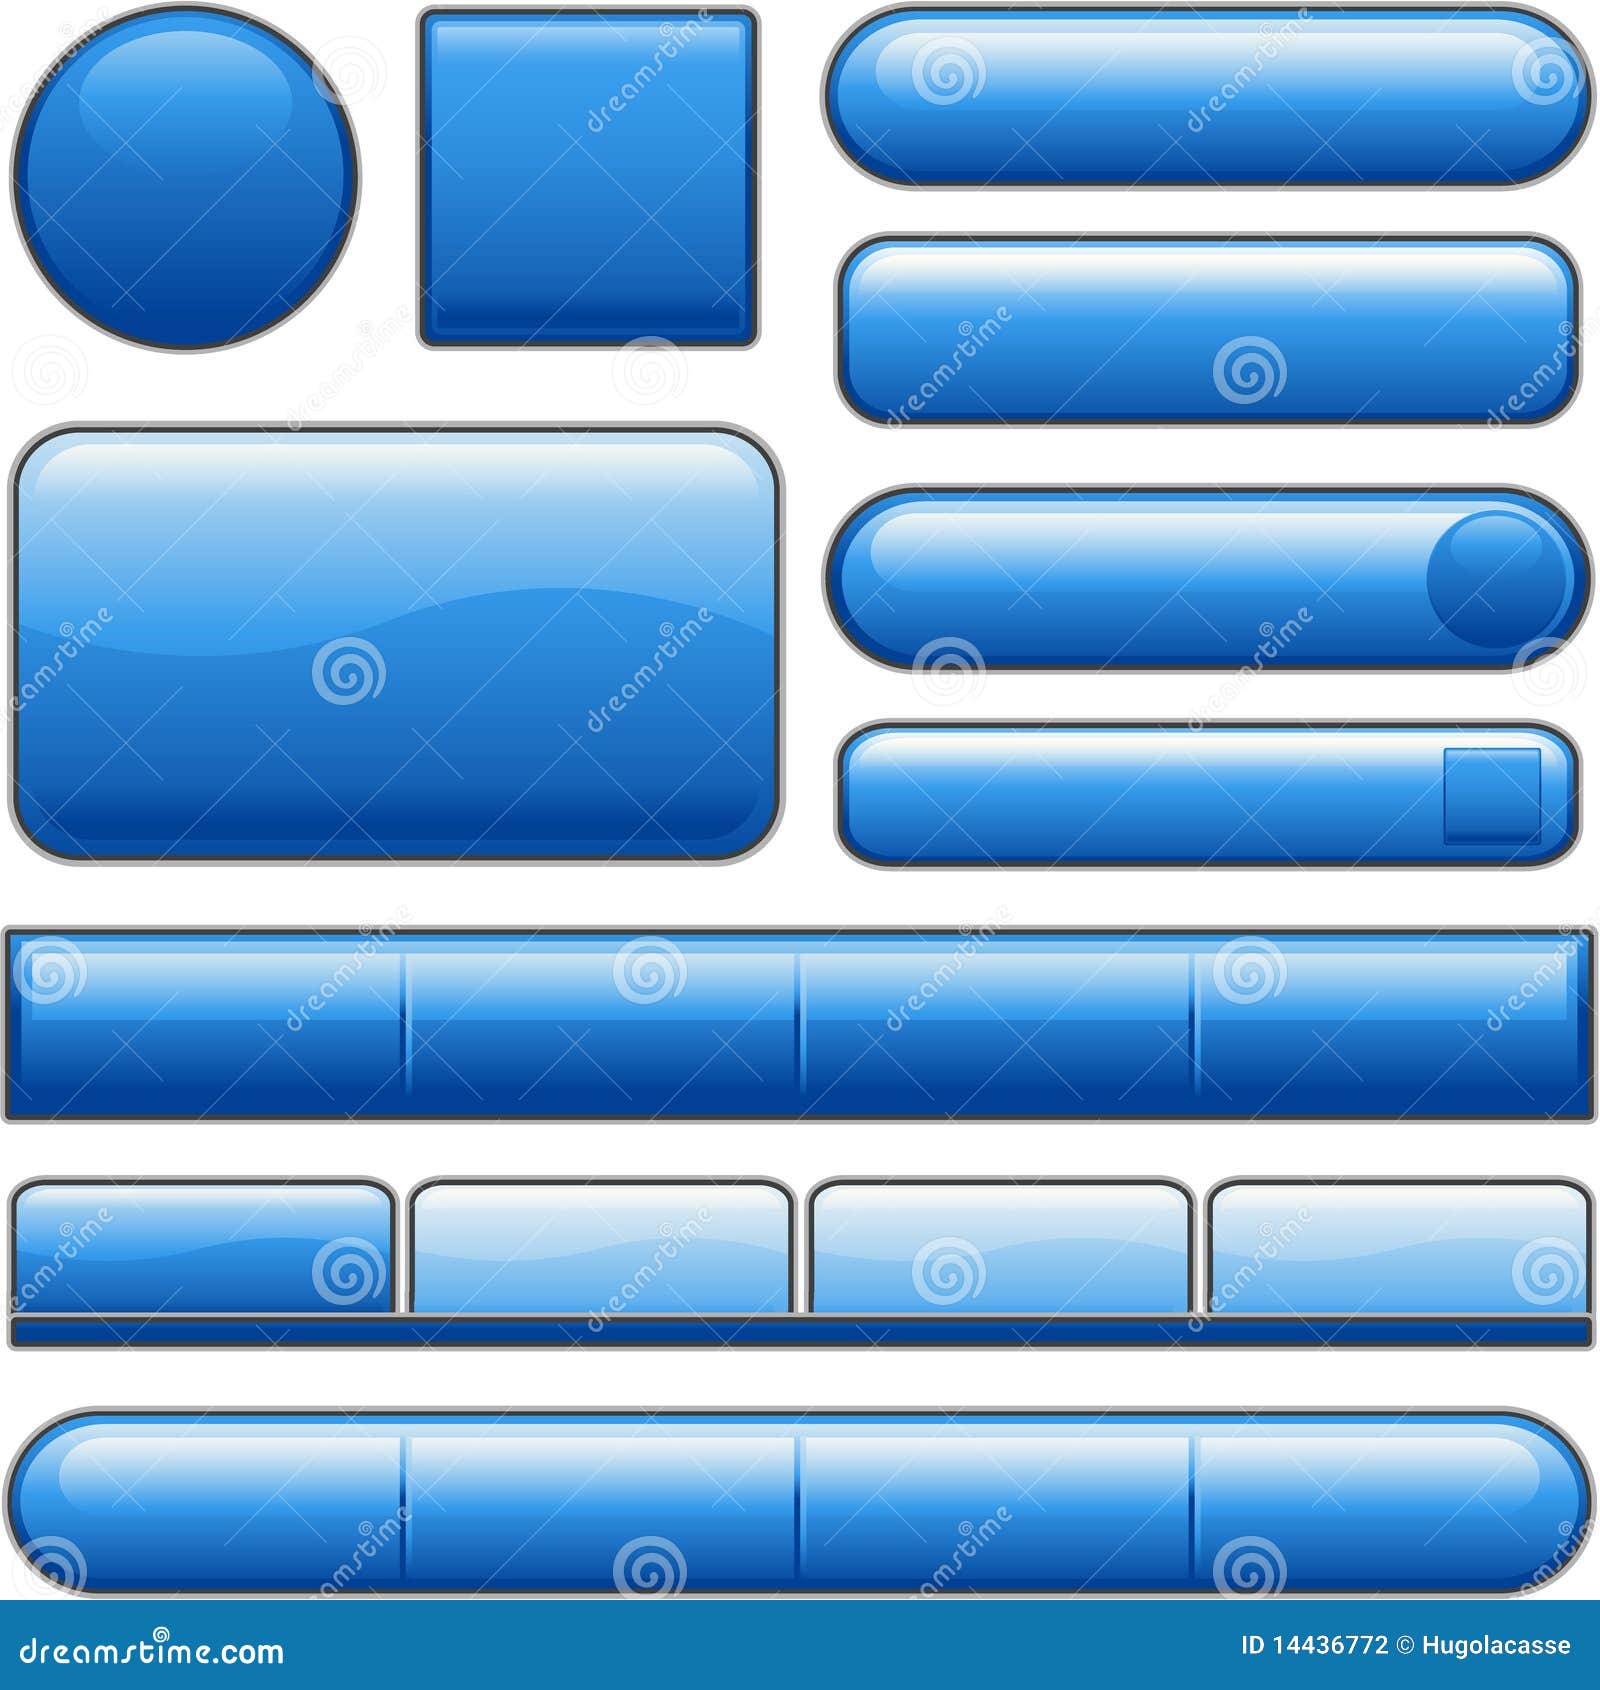 website blue glossy buttons